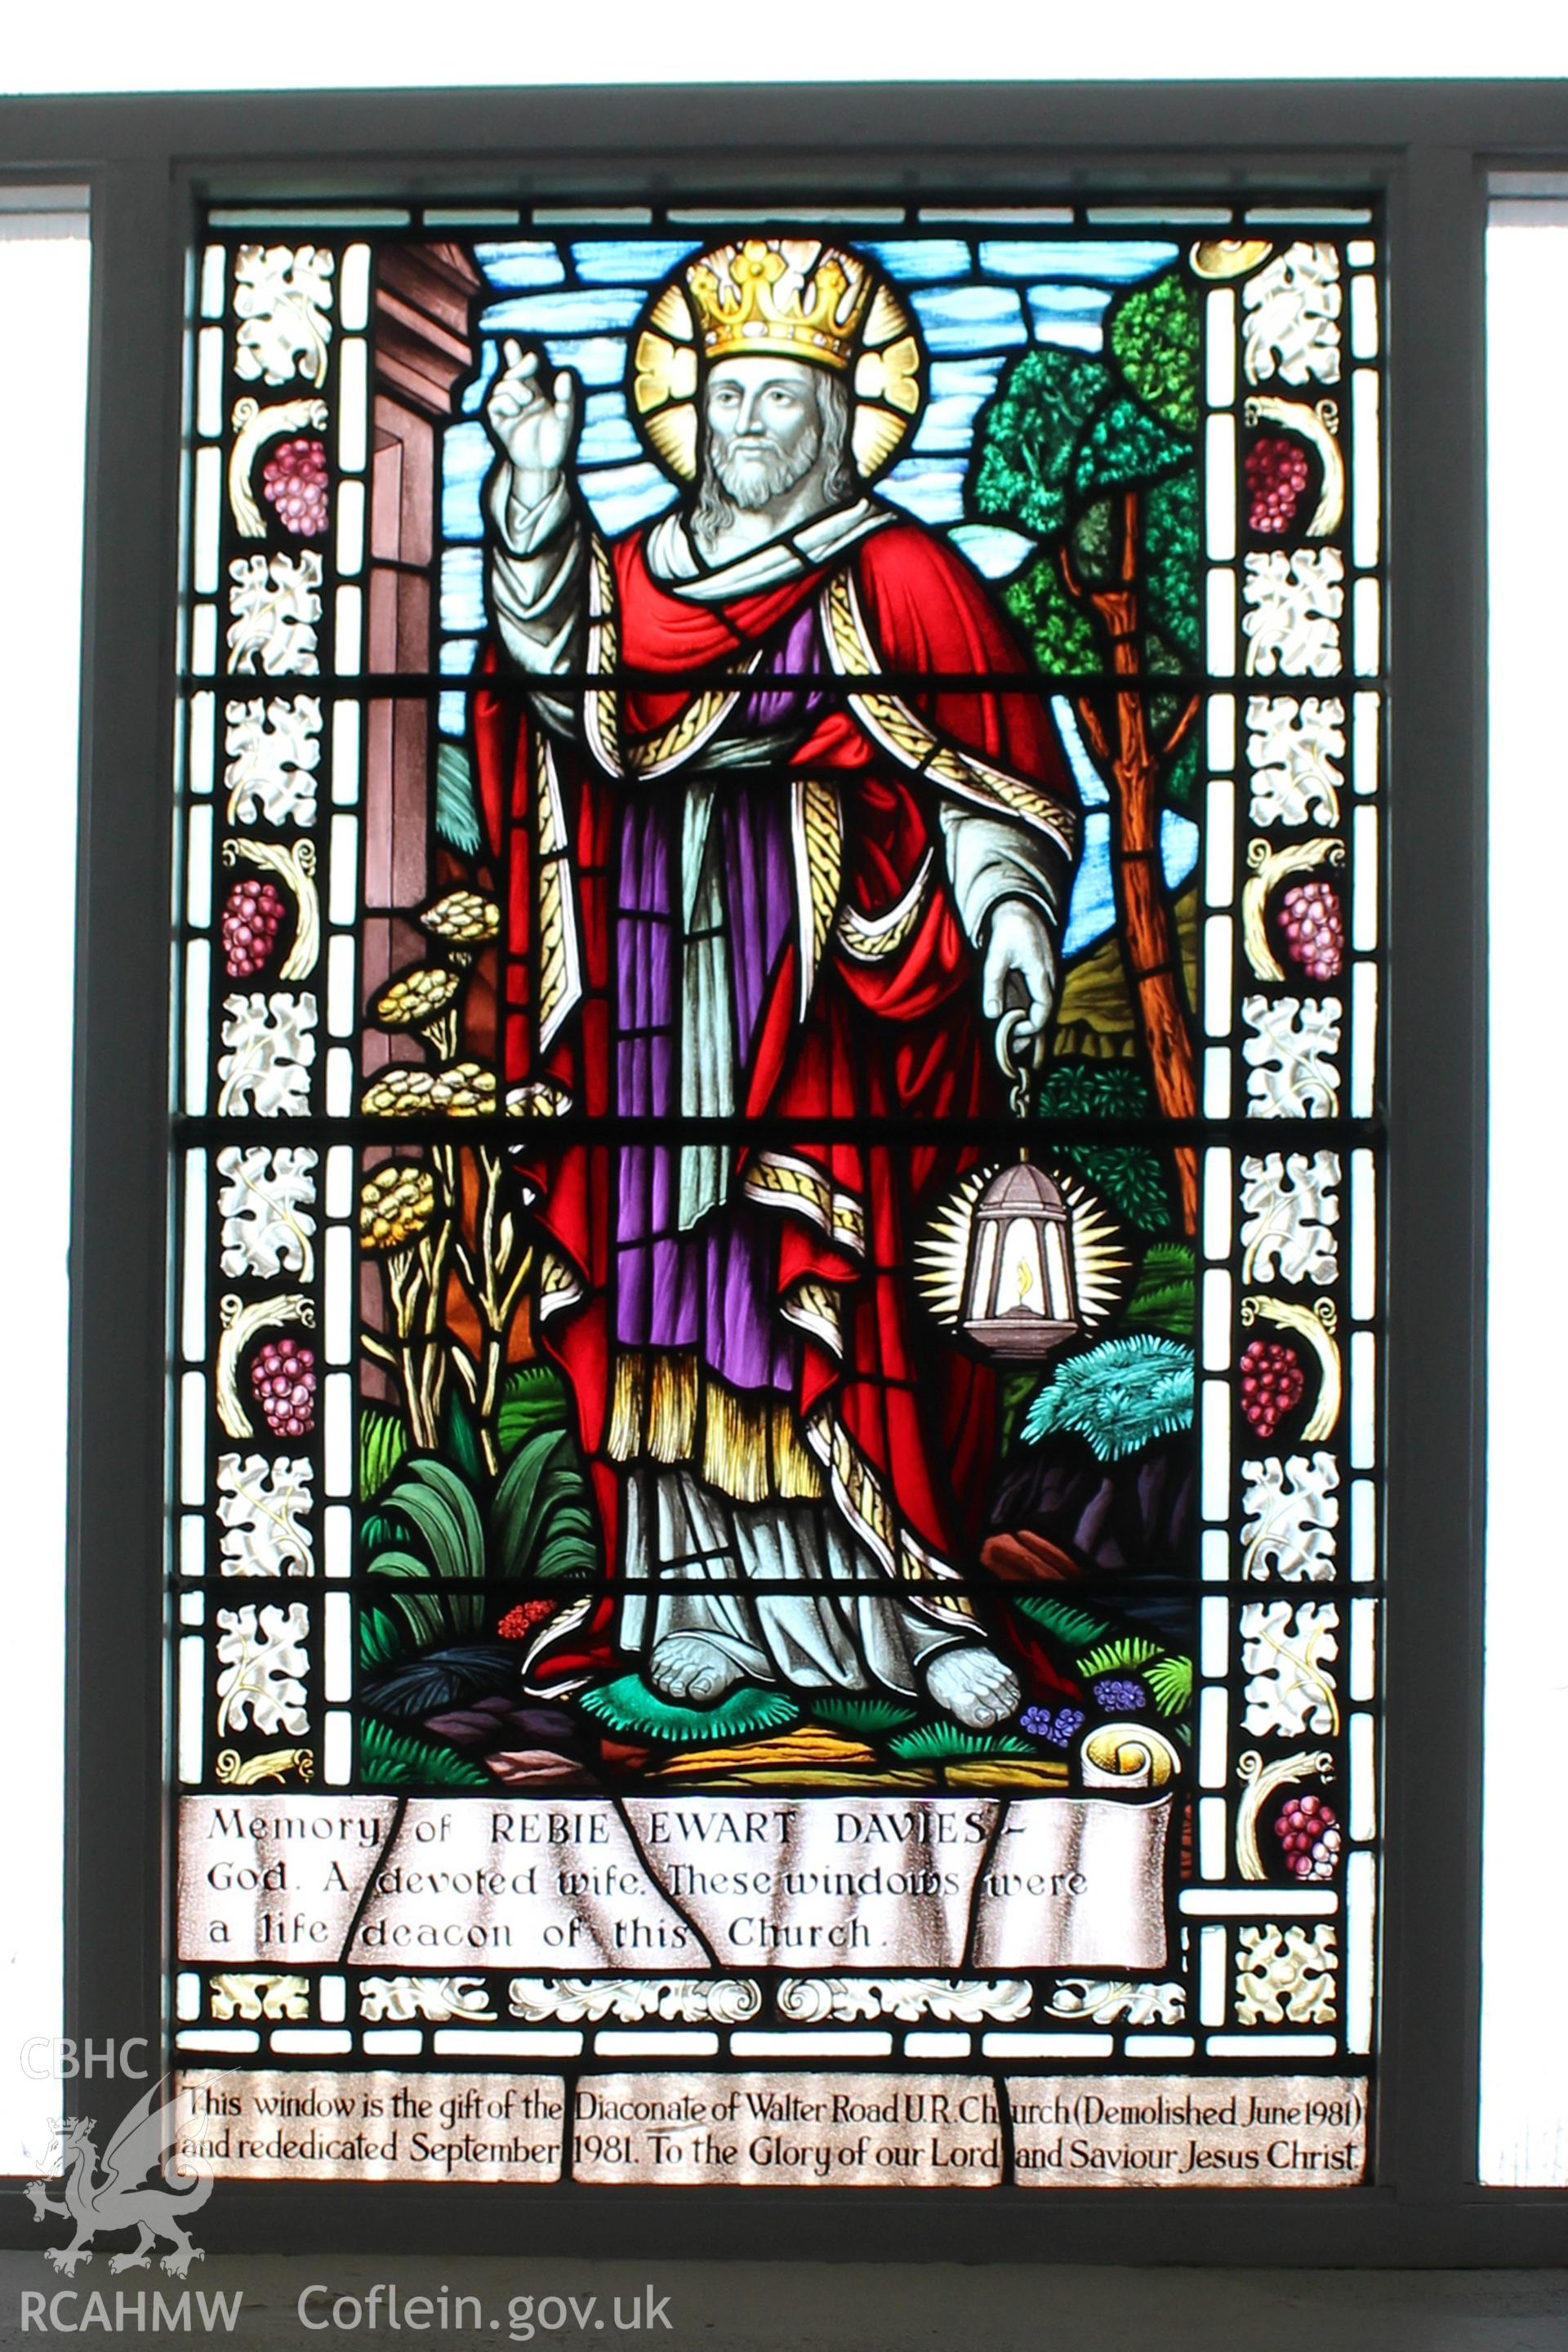 Colour photograph showing detail of stained glass window donated by the Daconate of Walter Road U.R. Church (Demolished June 1981) at Mynydd Bach Independent Chapel. Taken during photographic survey conducted by Sue Fielding on 13th May 2017.